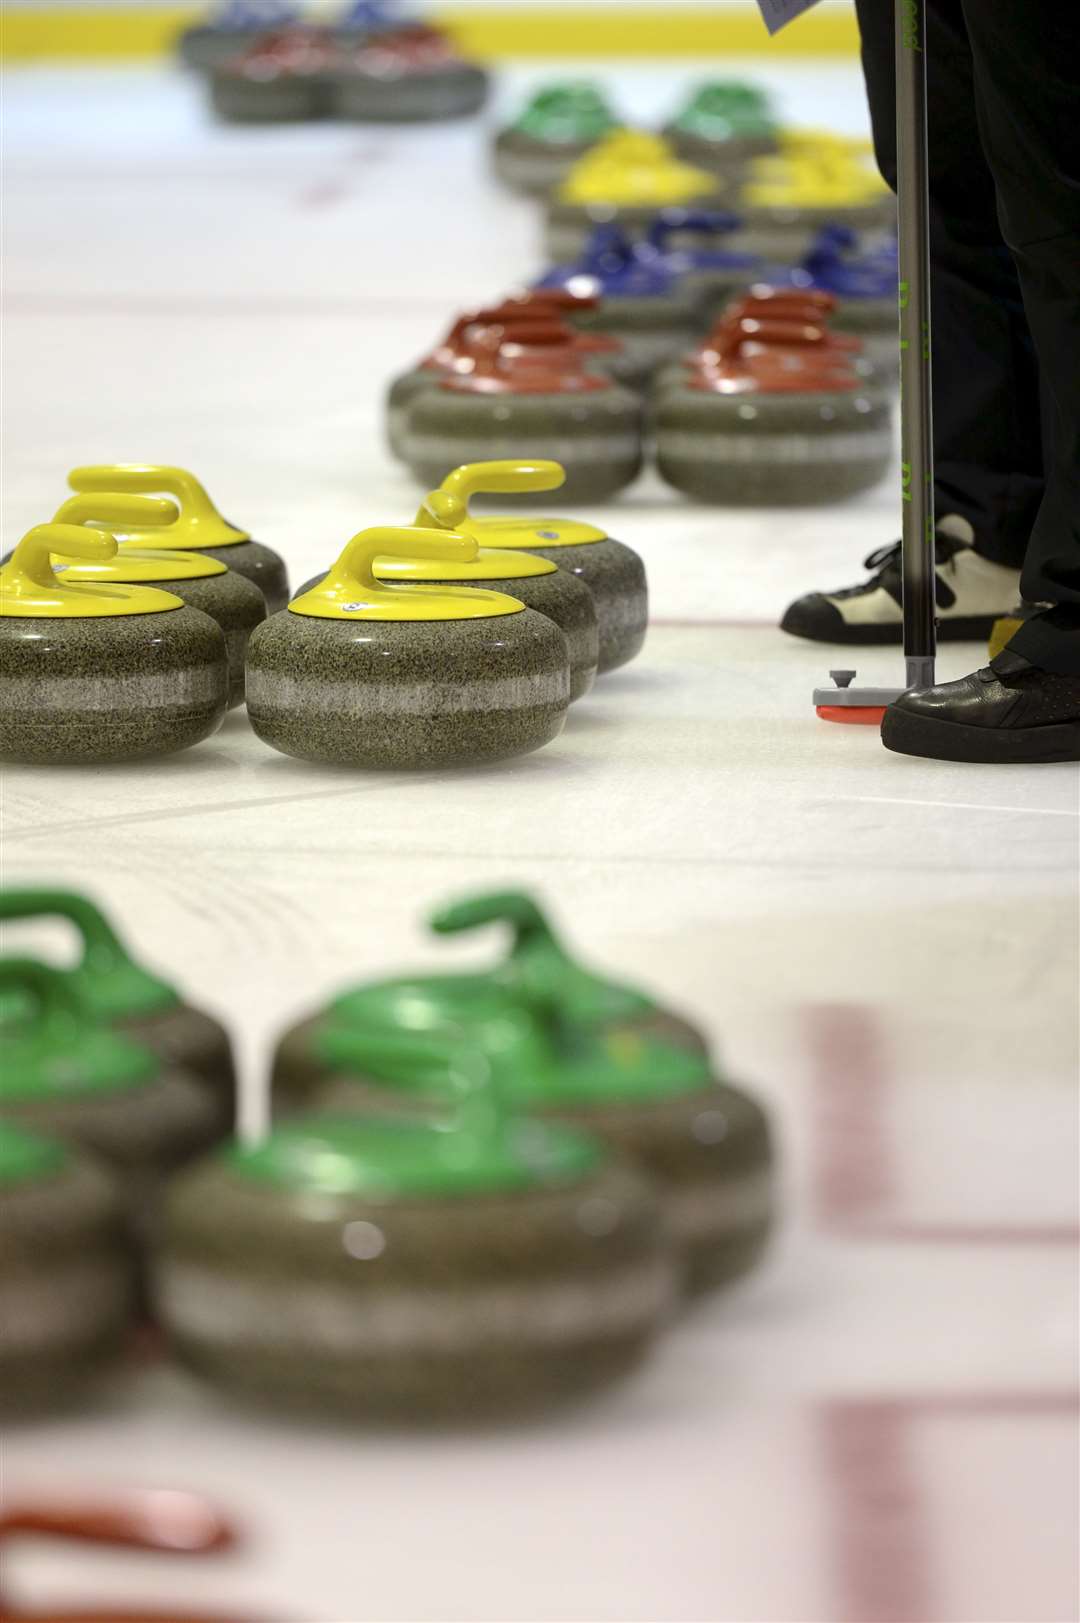 Inverness Skins Curling Competition takes palace this weekend.